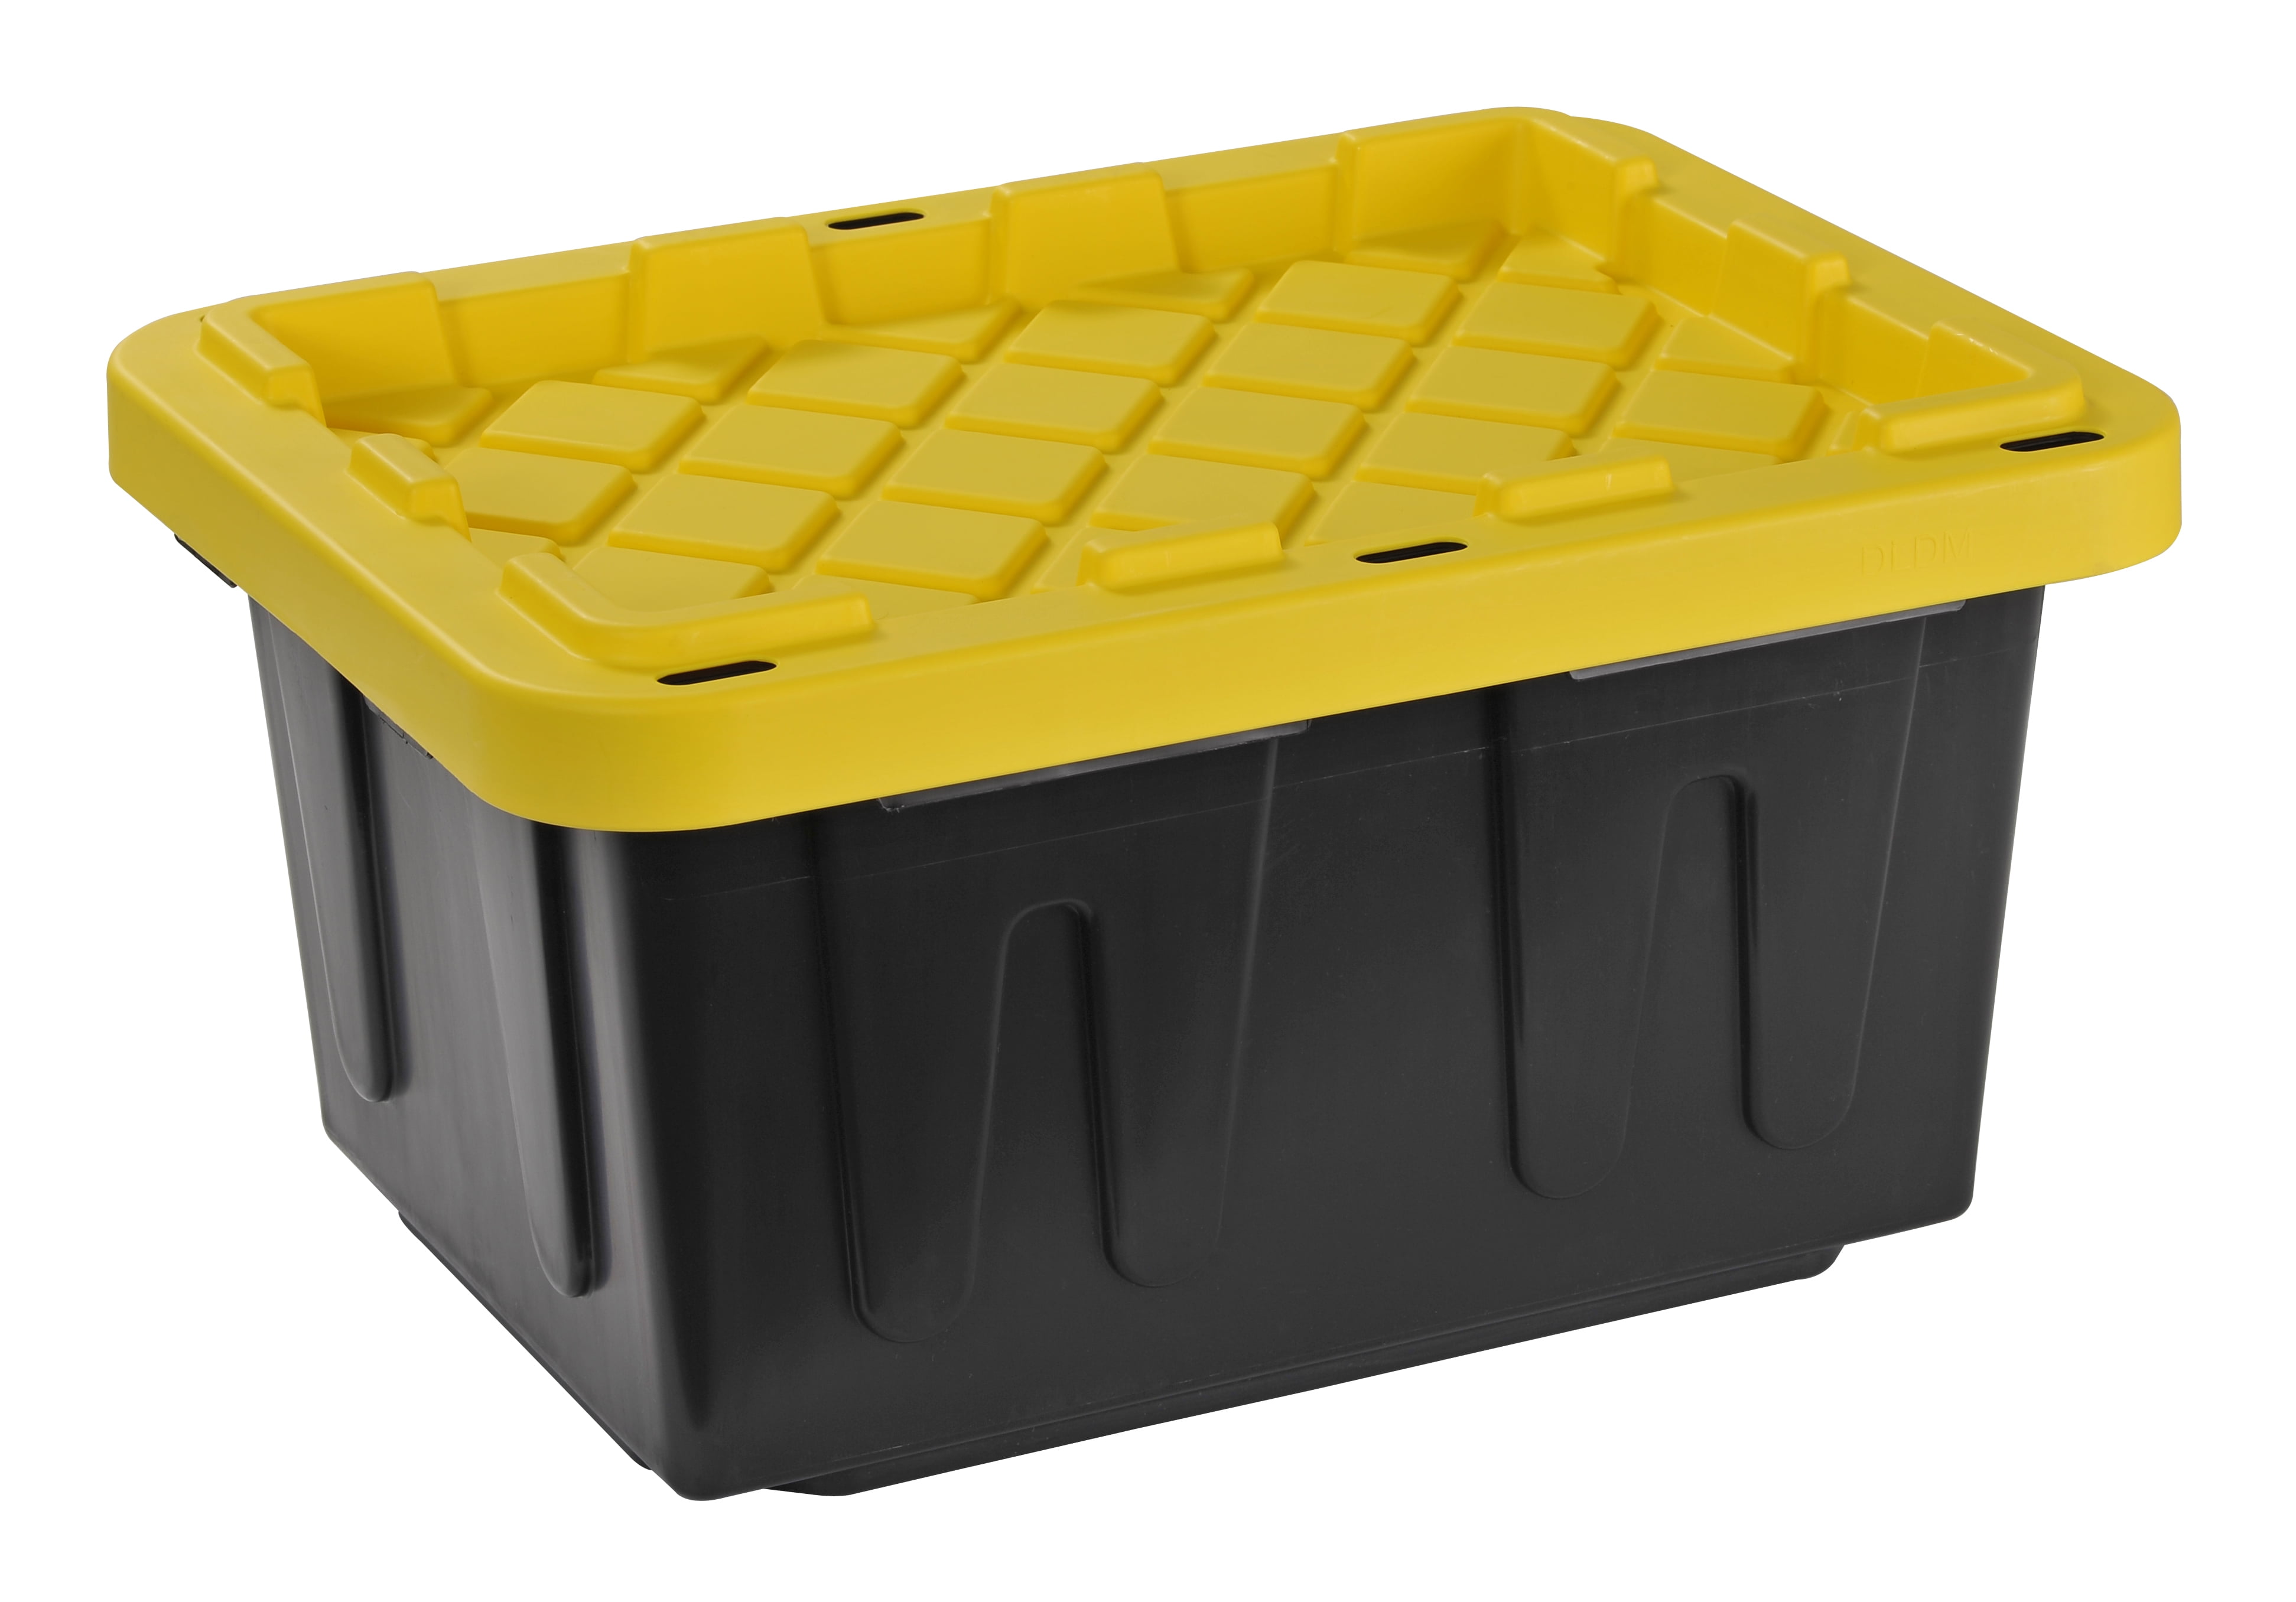 Rubbermaid Commercial Plastic Food Storage Container Lid, Round, Yellow 4 Quart